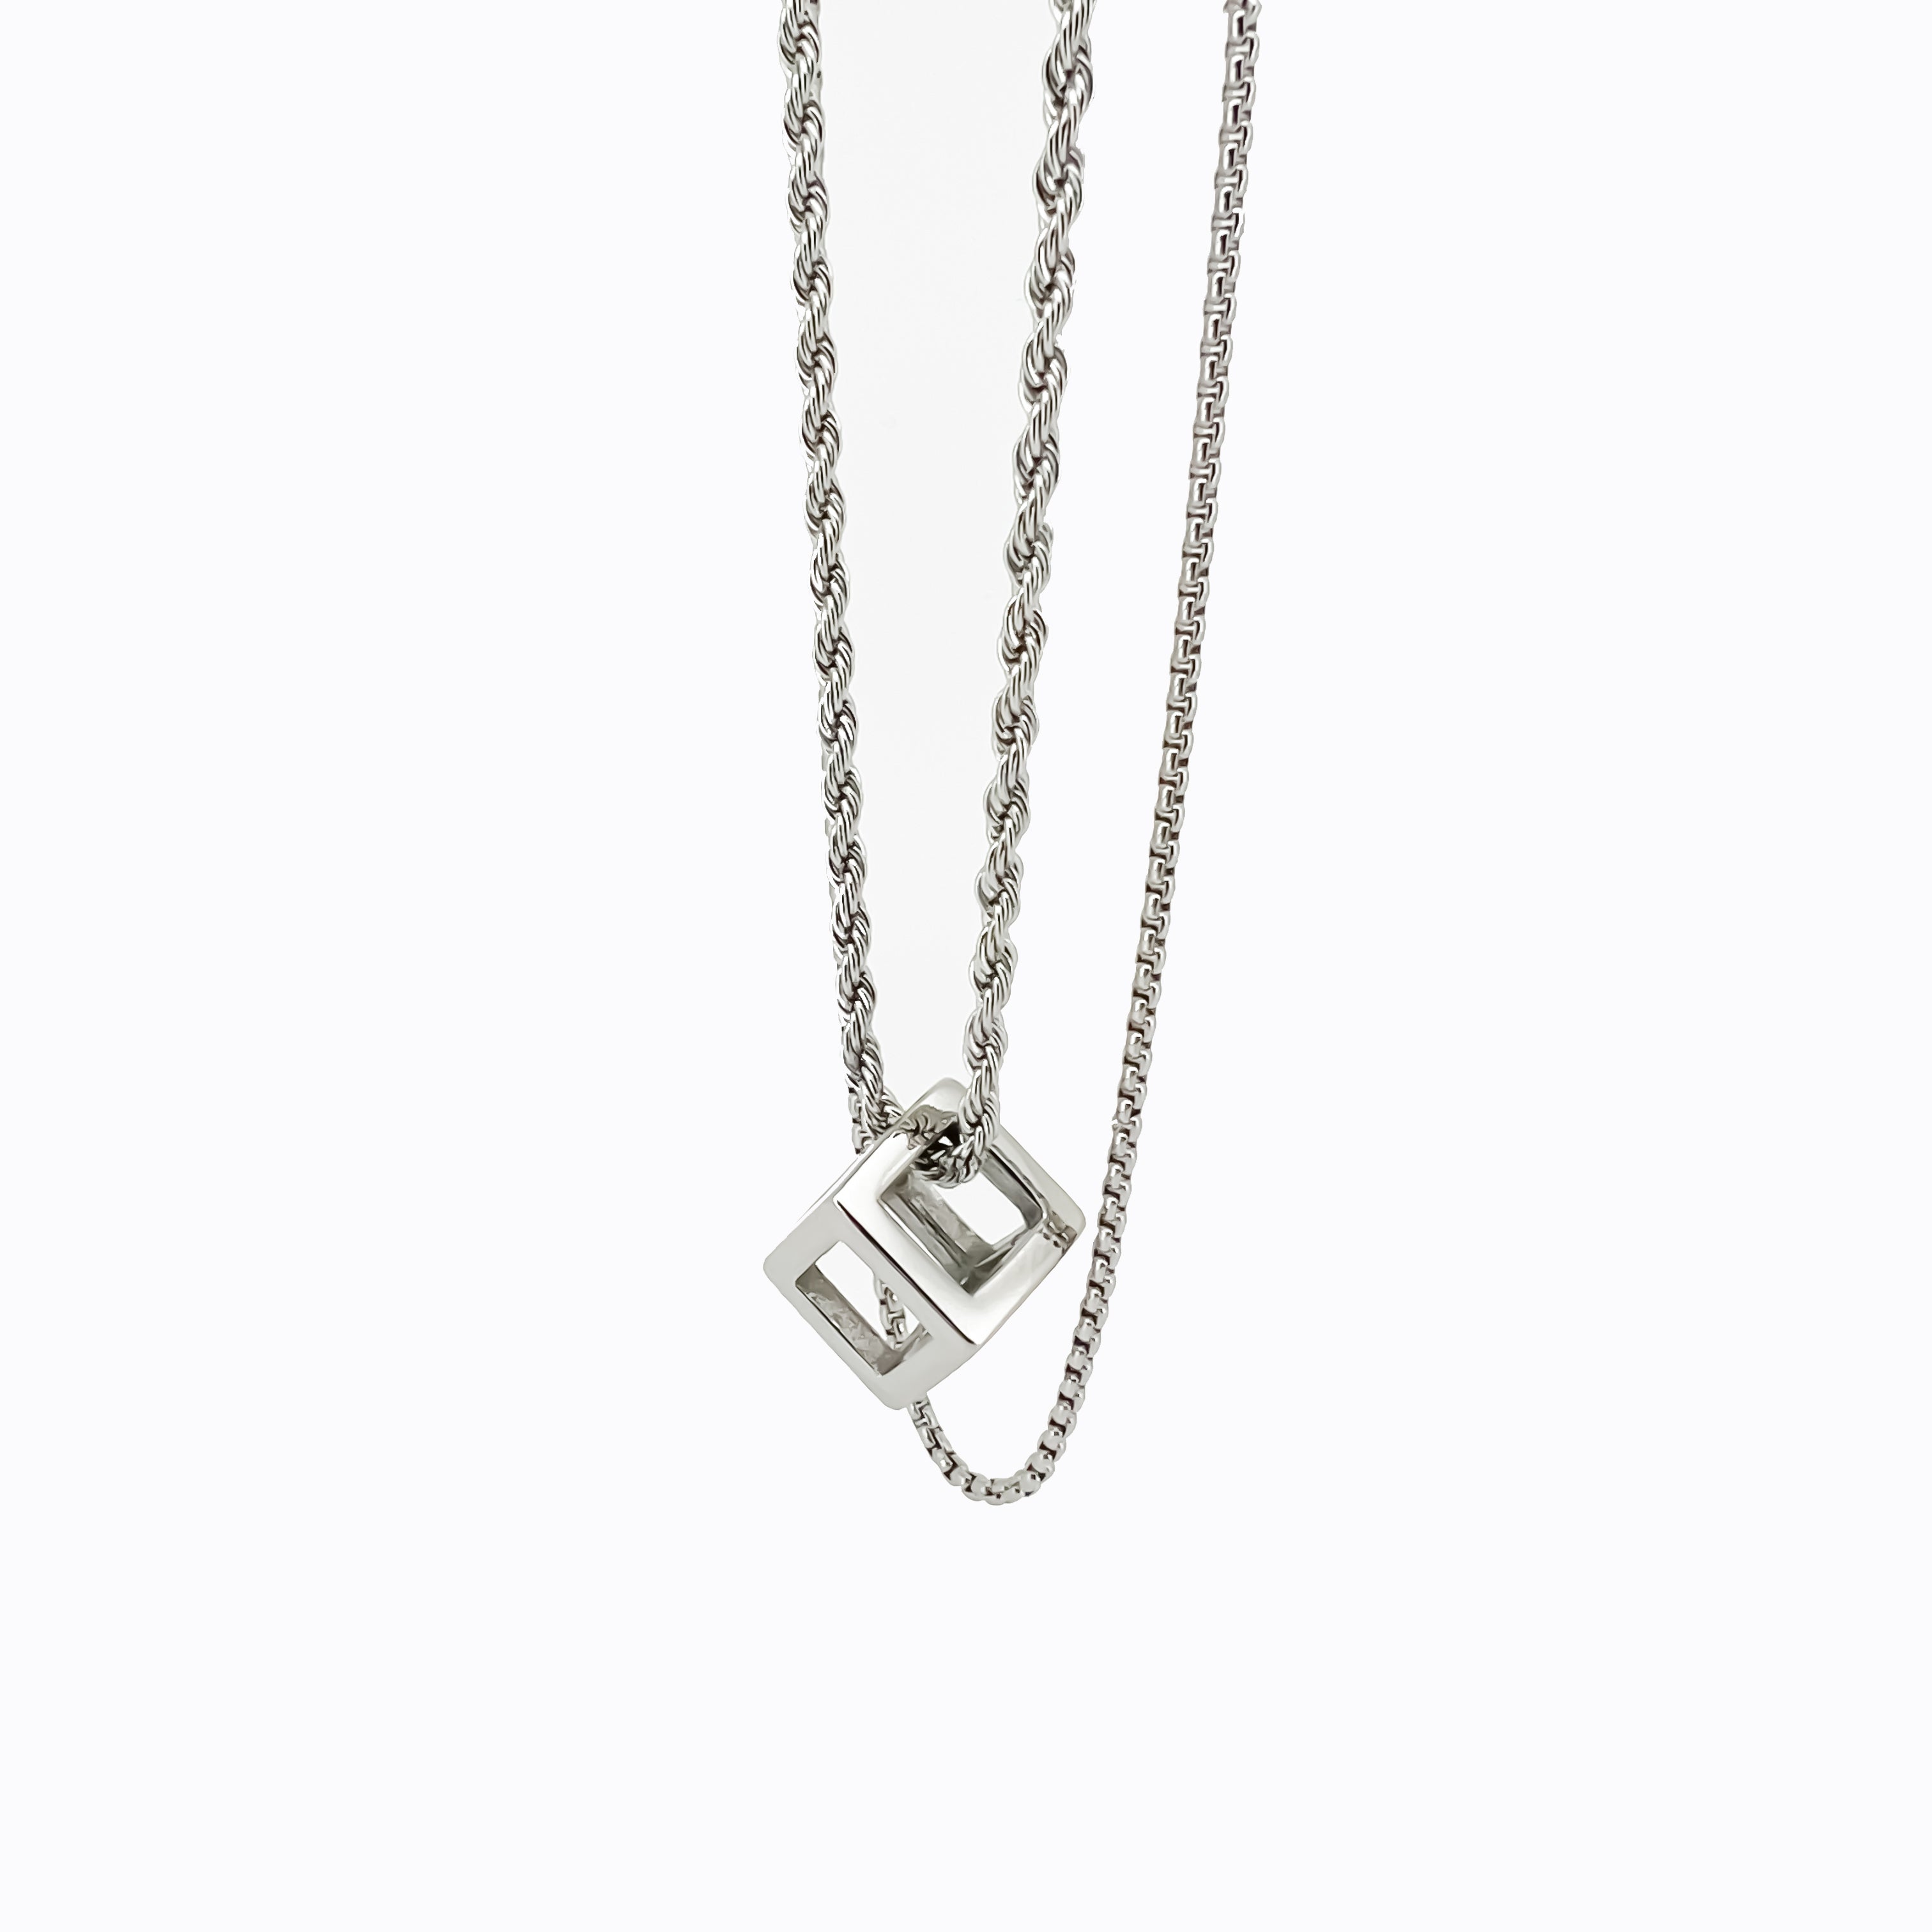 Mattis Stainless Steel Necklace with Geometric Square Pendant